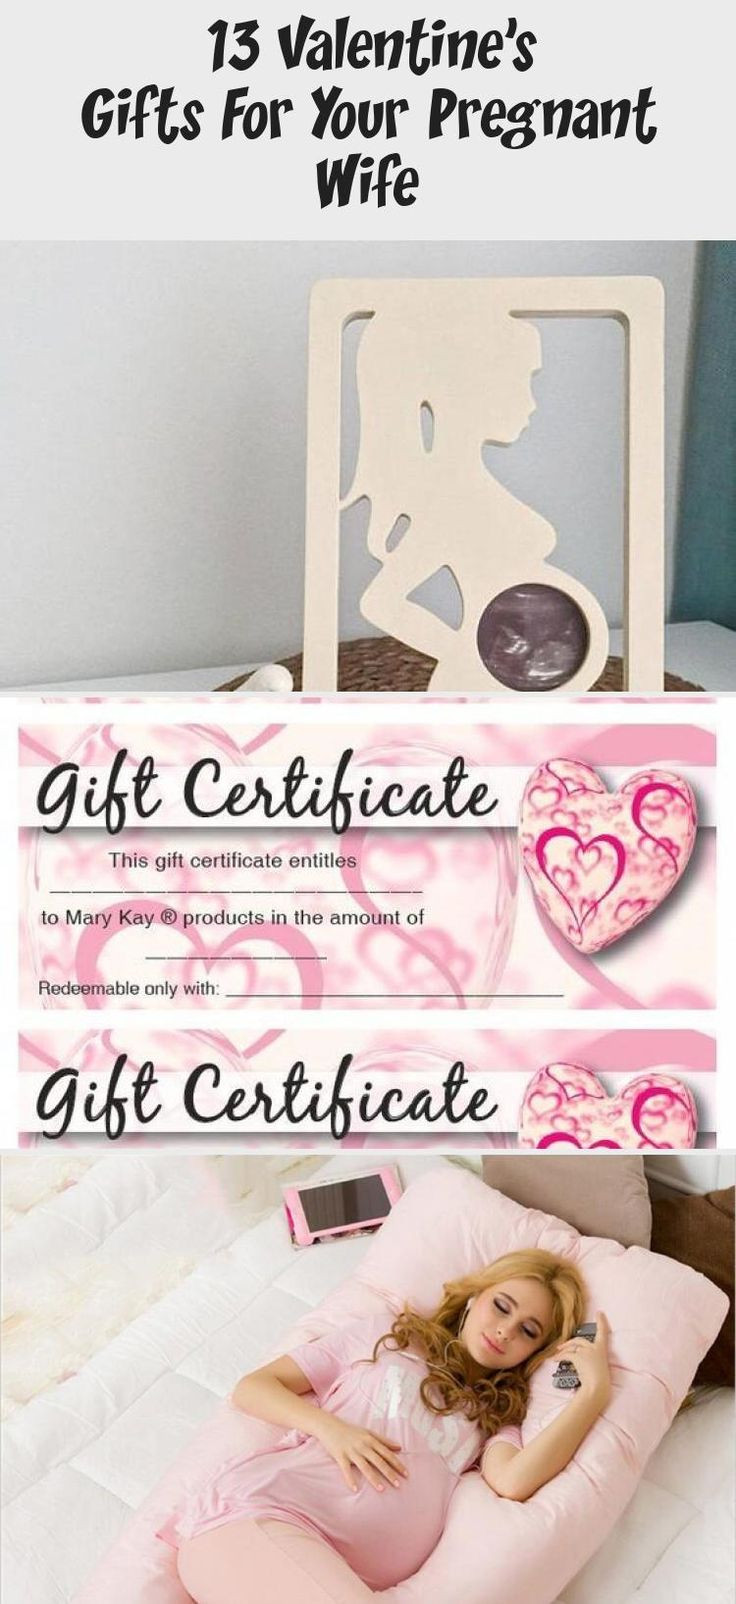 Valentines Gift Ideas For Pregnant Wife
 Pin auf Pregnancy